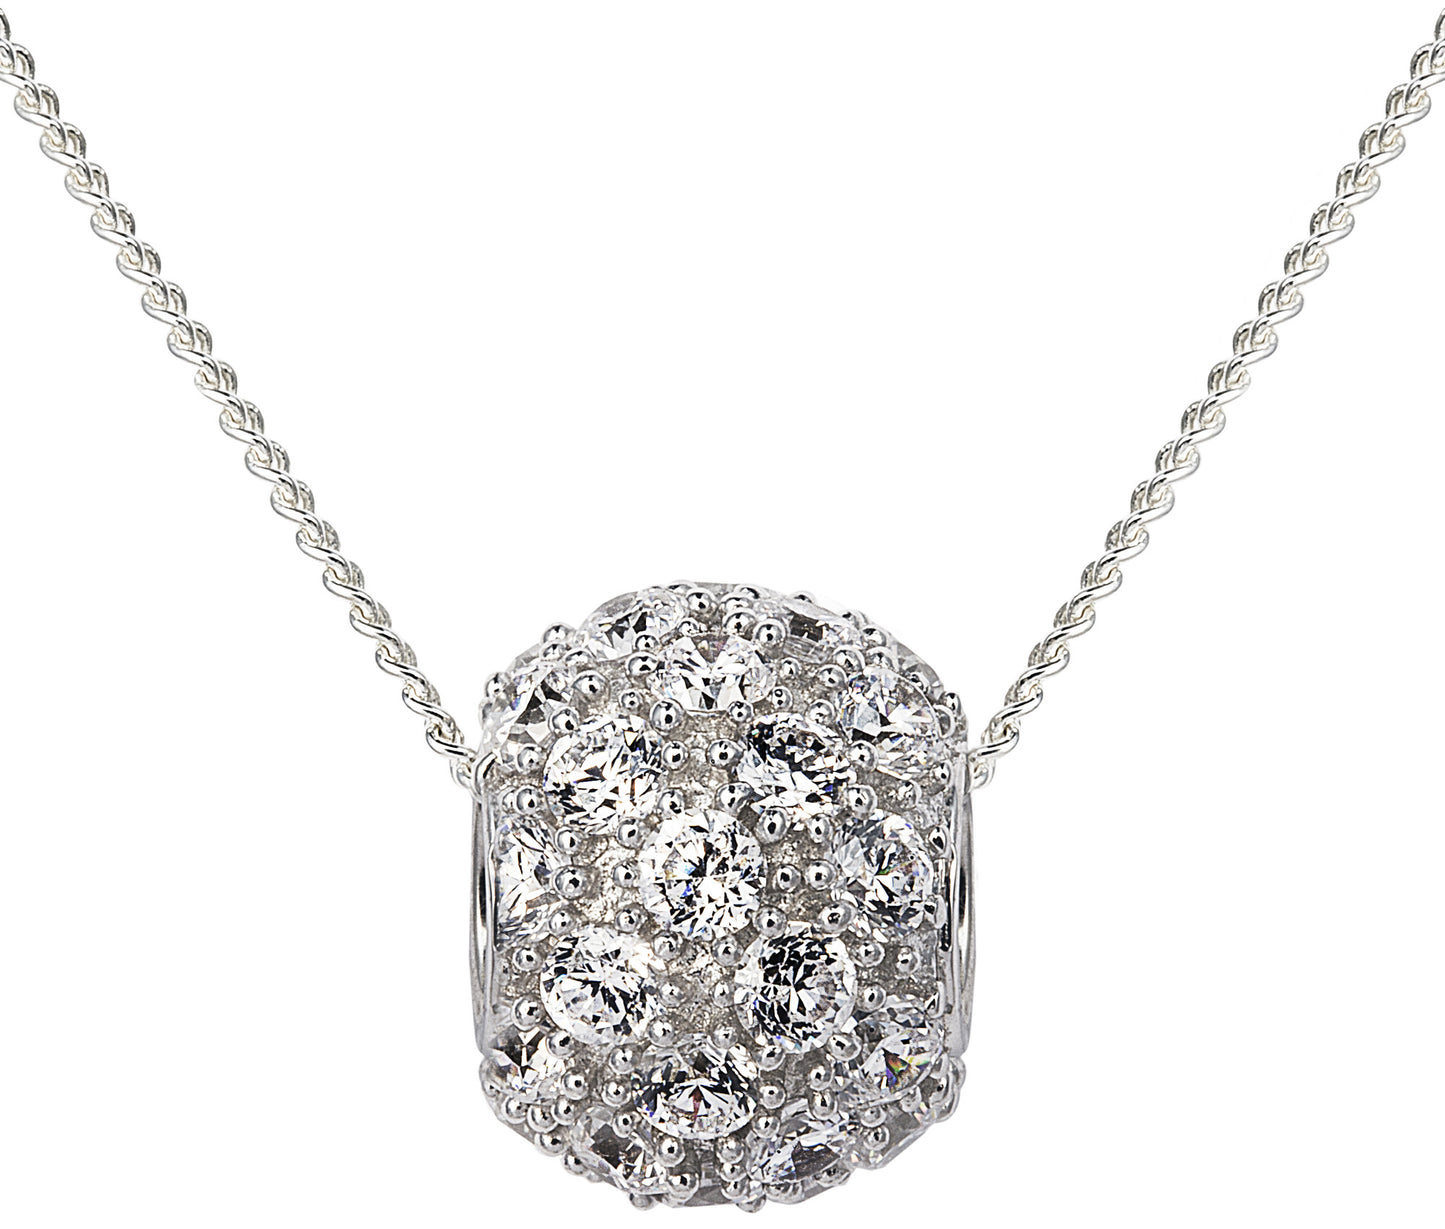 Bella Ball Necklace in 925 Sterling Silver with Cubic Zirconia Stones. Worldwide Shipping + Free Shipping Australia wide ($150+). Affordable luxury jewellery by Bellagio & Co.